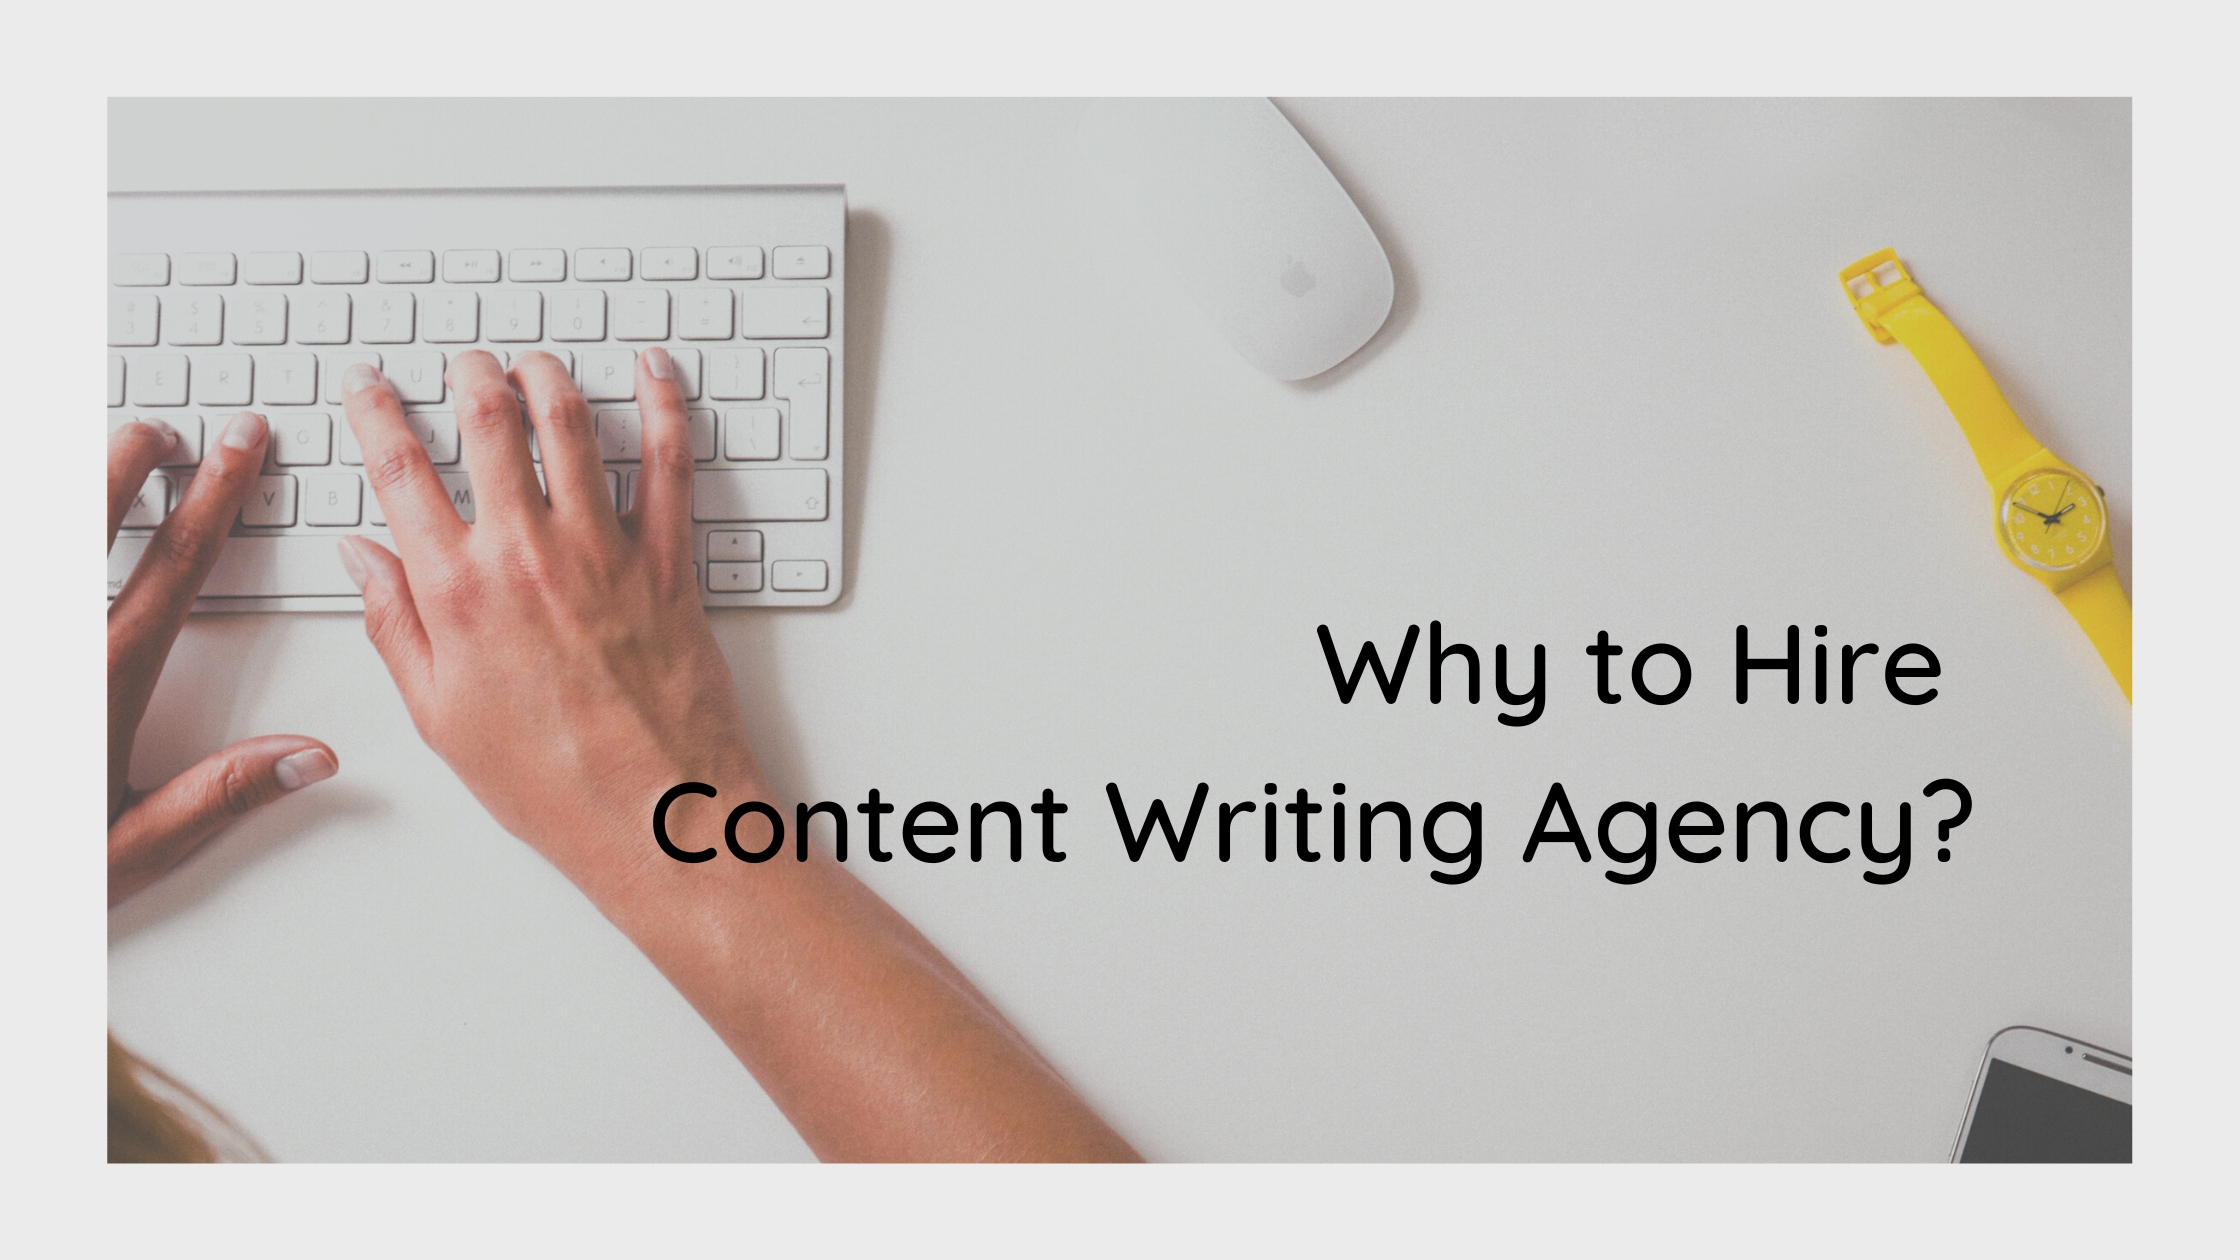 Why to Hire Content Writing Agency